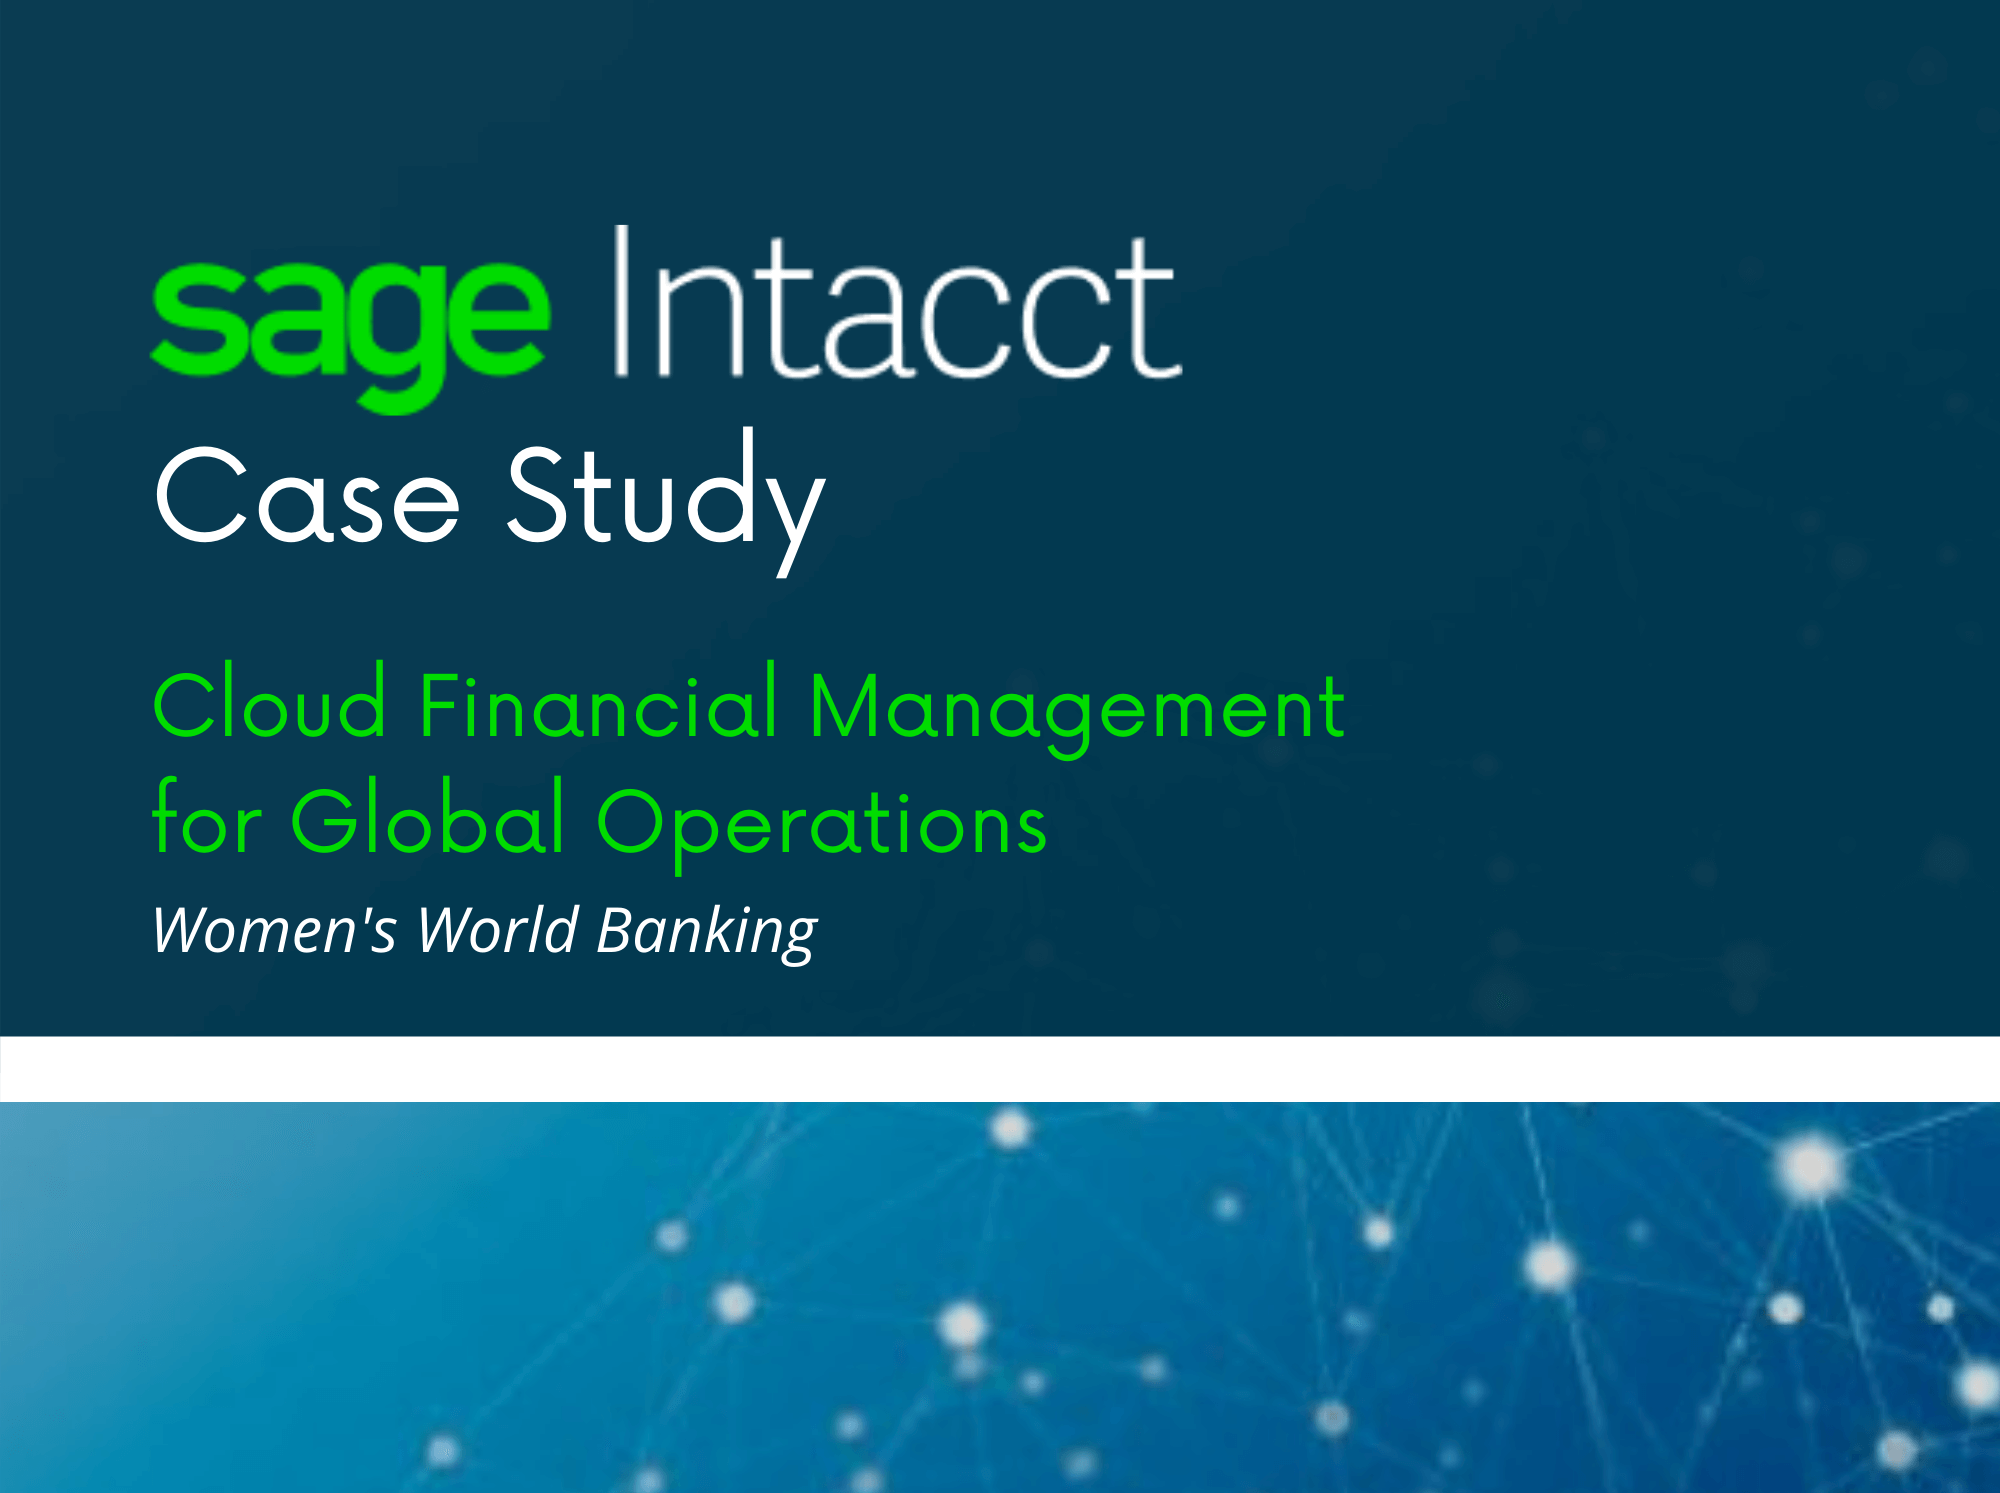 Sage Intacct Case Study: Cloud Financial Management for Global Operations – Women’s World Banking